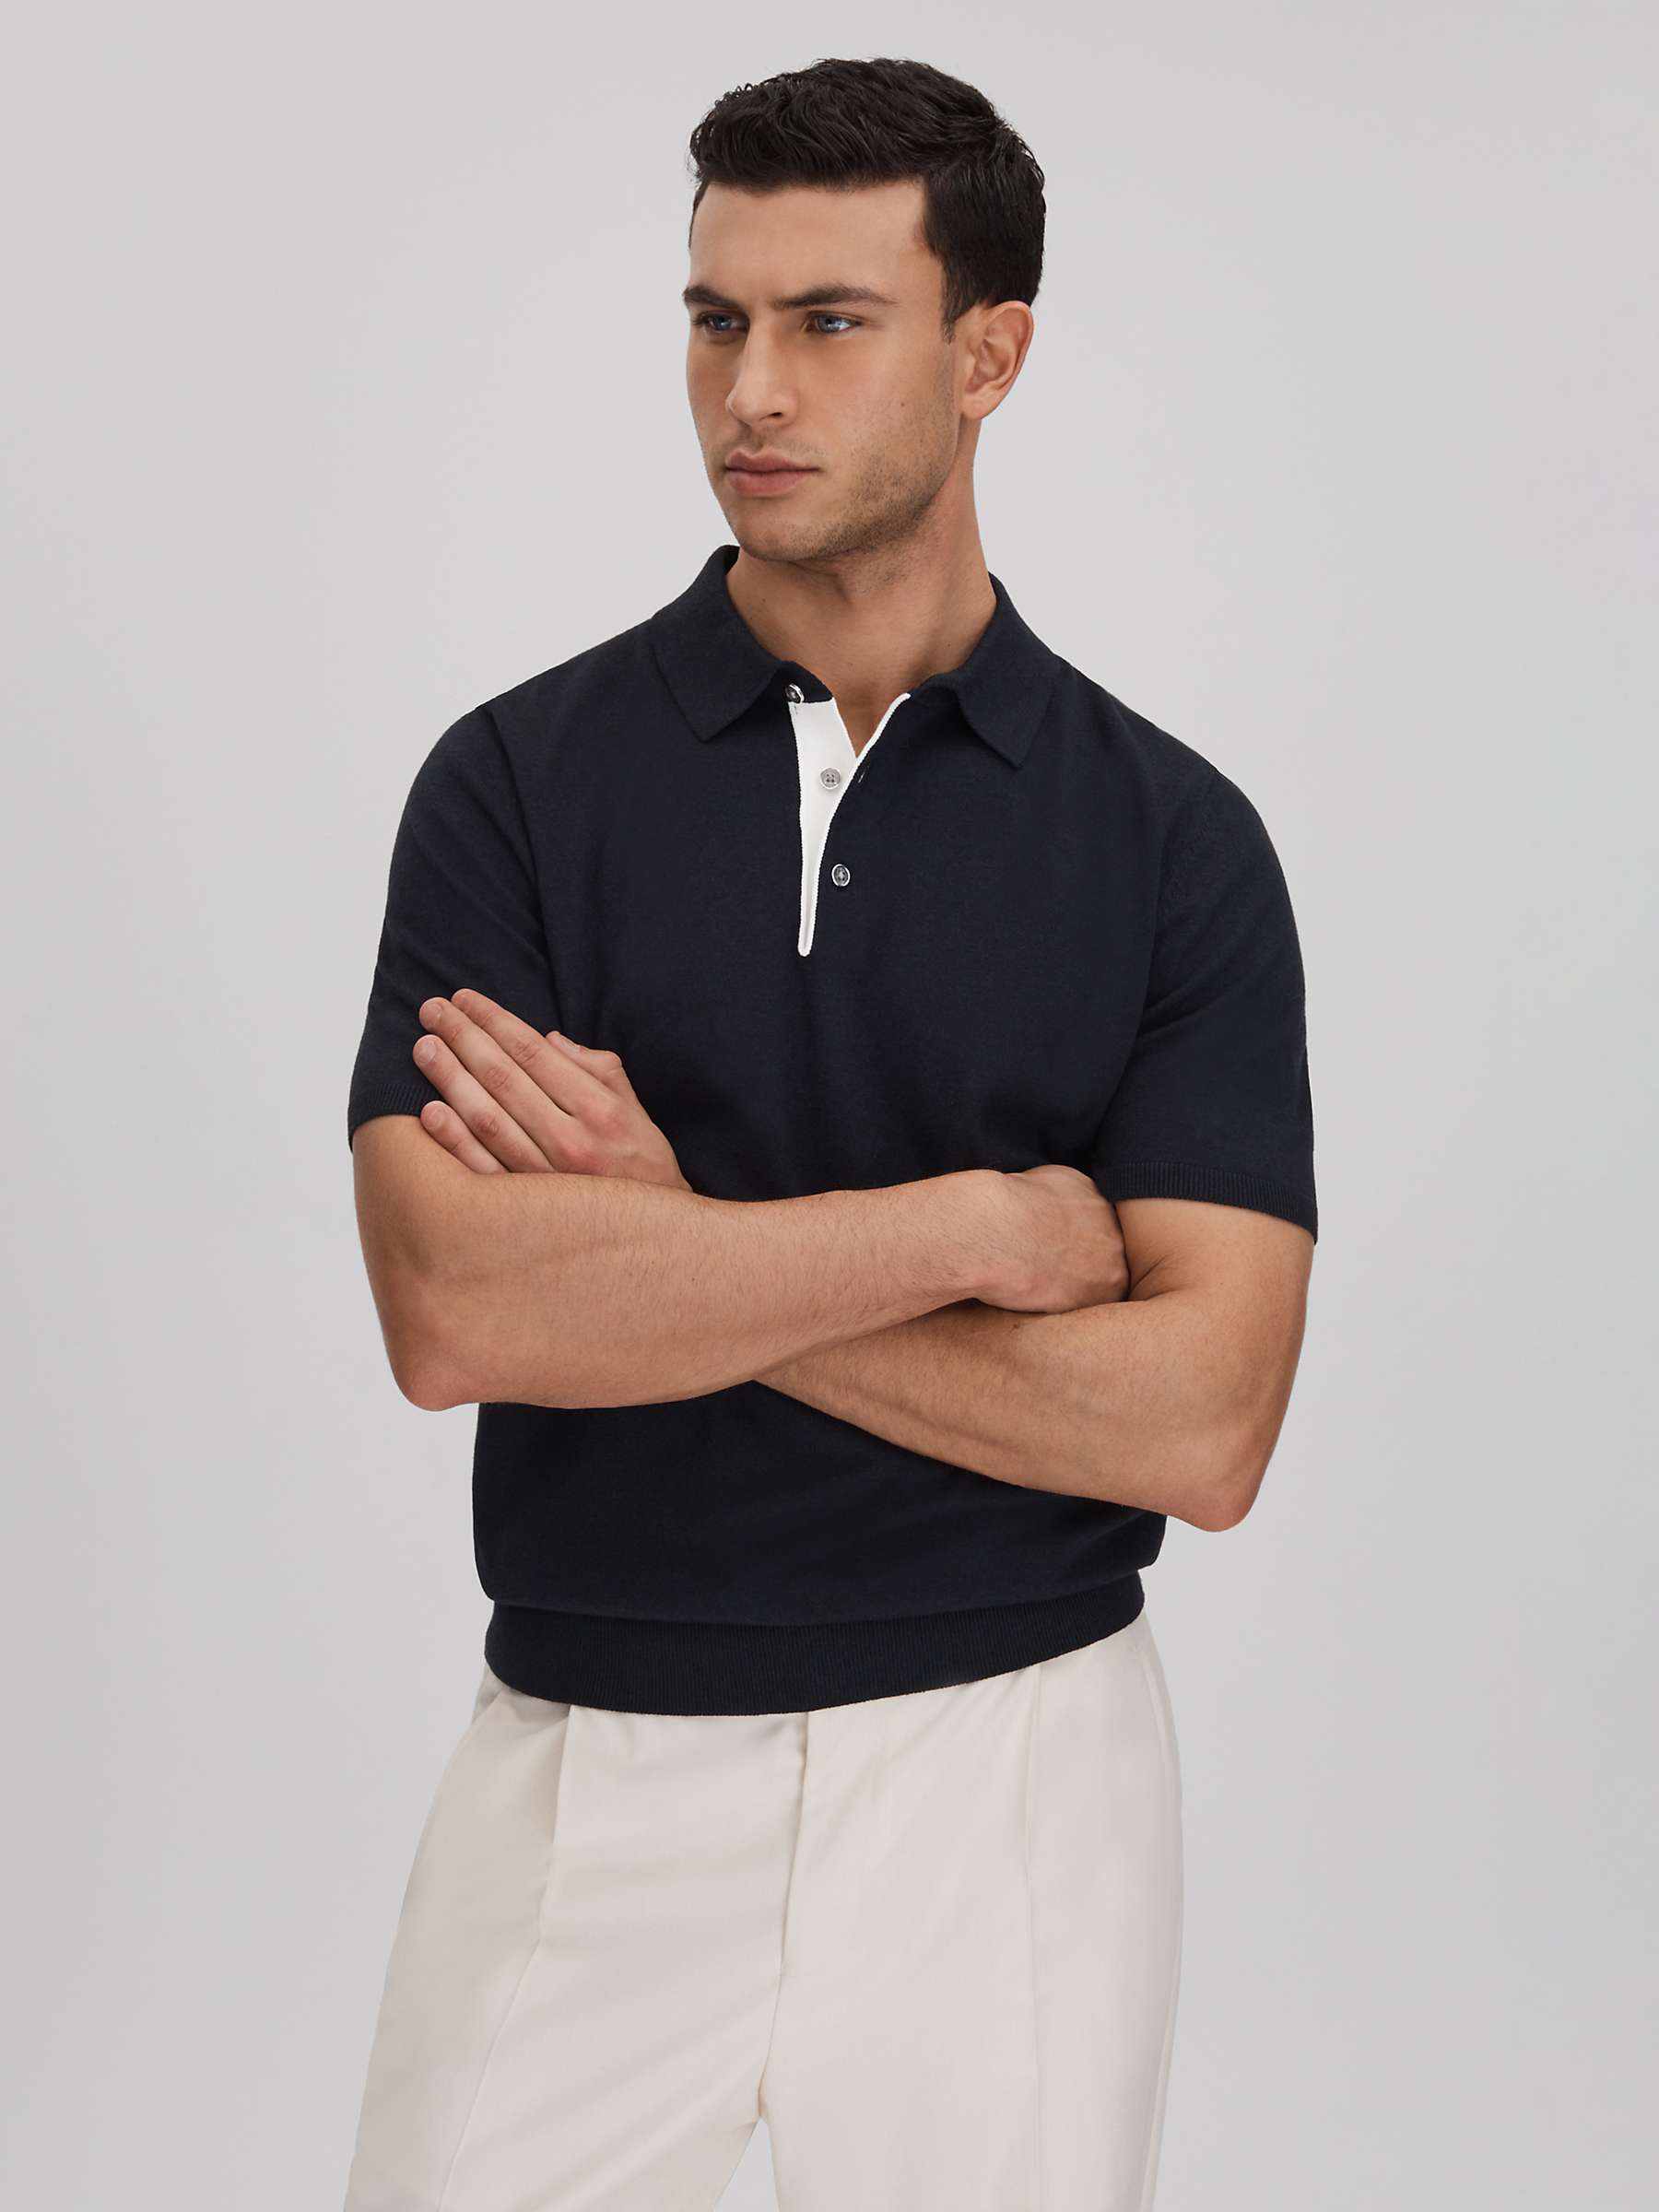 Buy Reiss Finch Knitted Polo Shirt, Navy Online at johnlewis.com